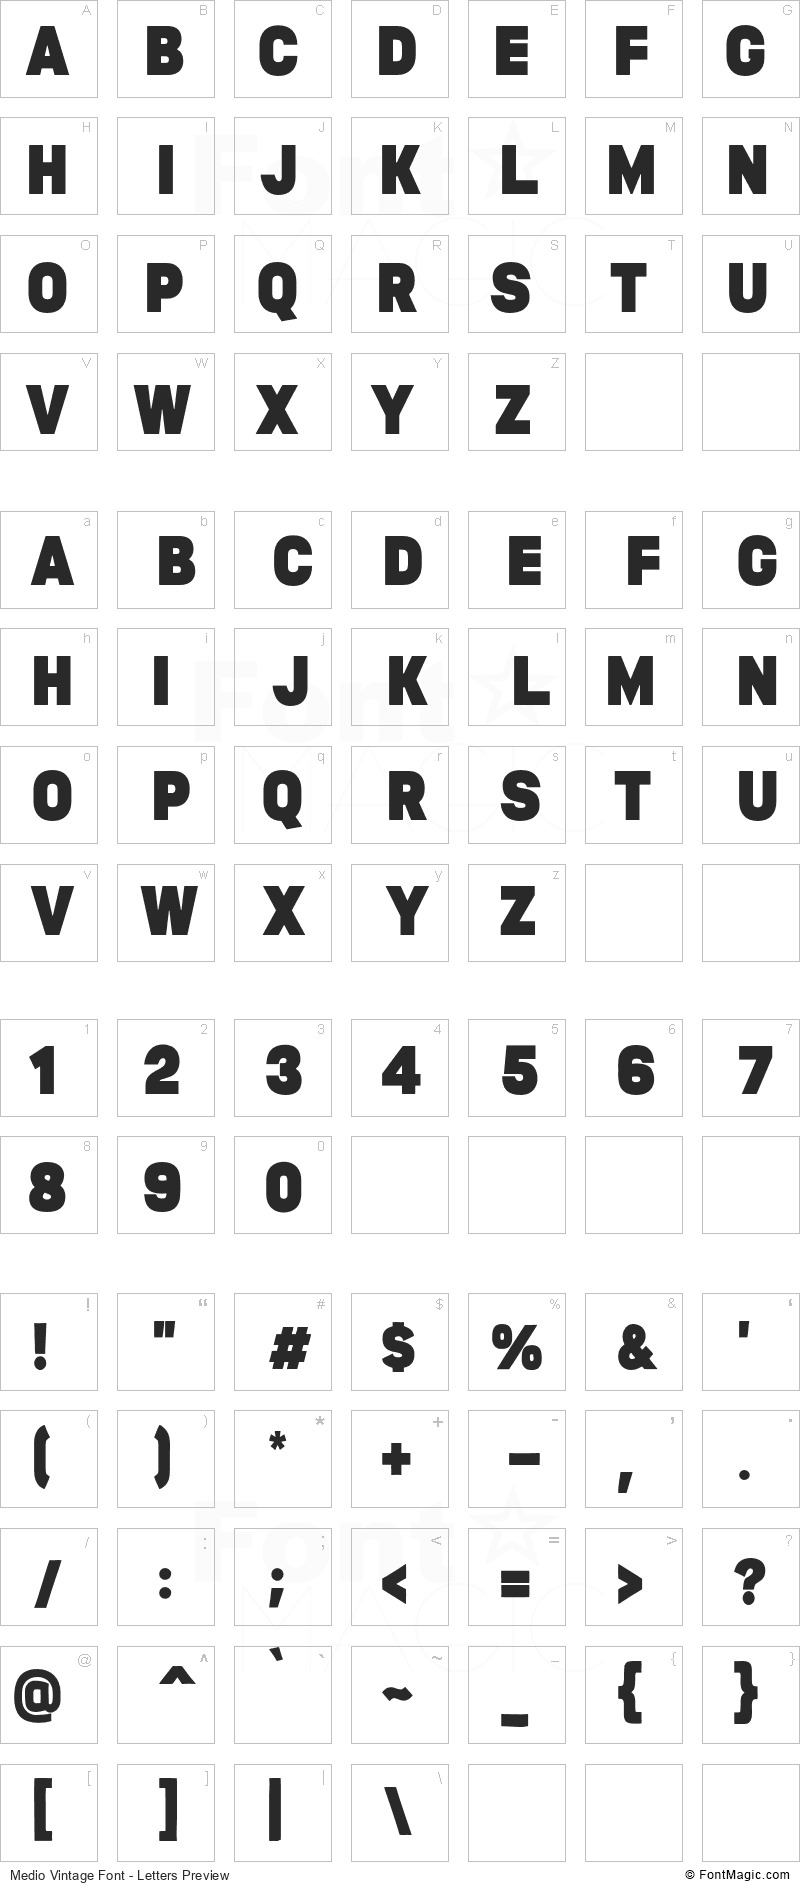 Medio Vintage Font - All Latters Preview Chart